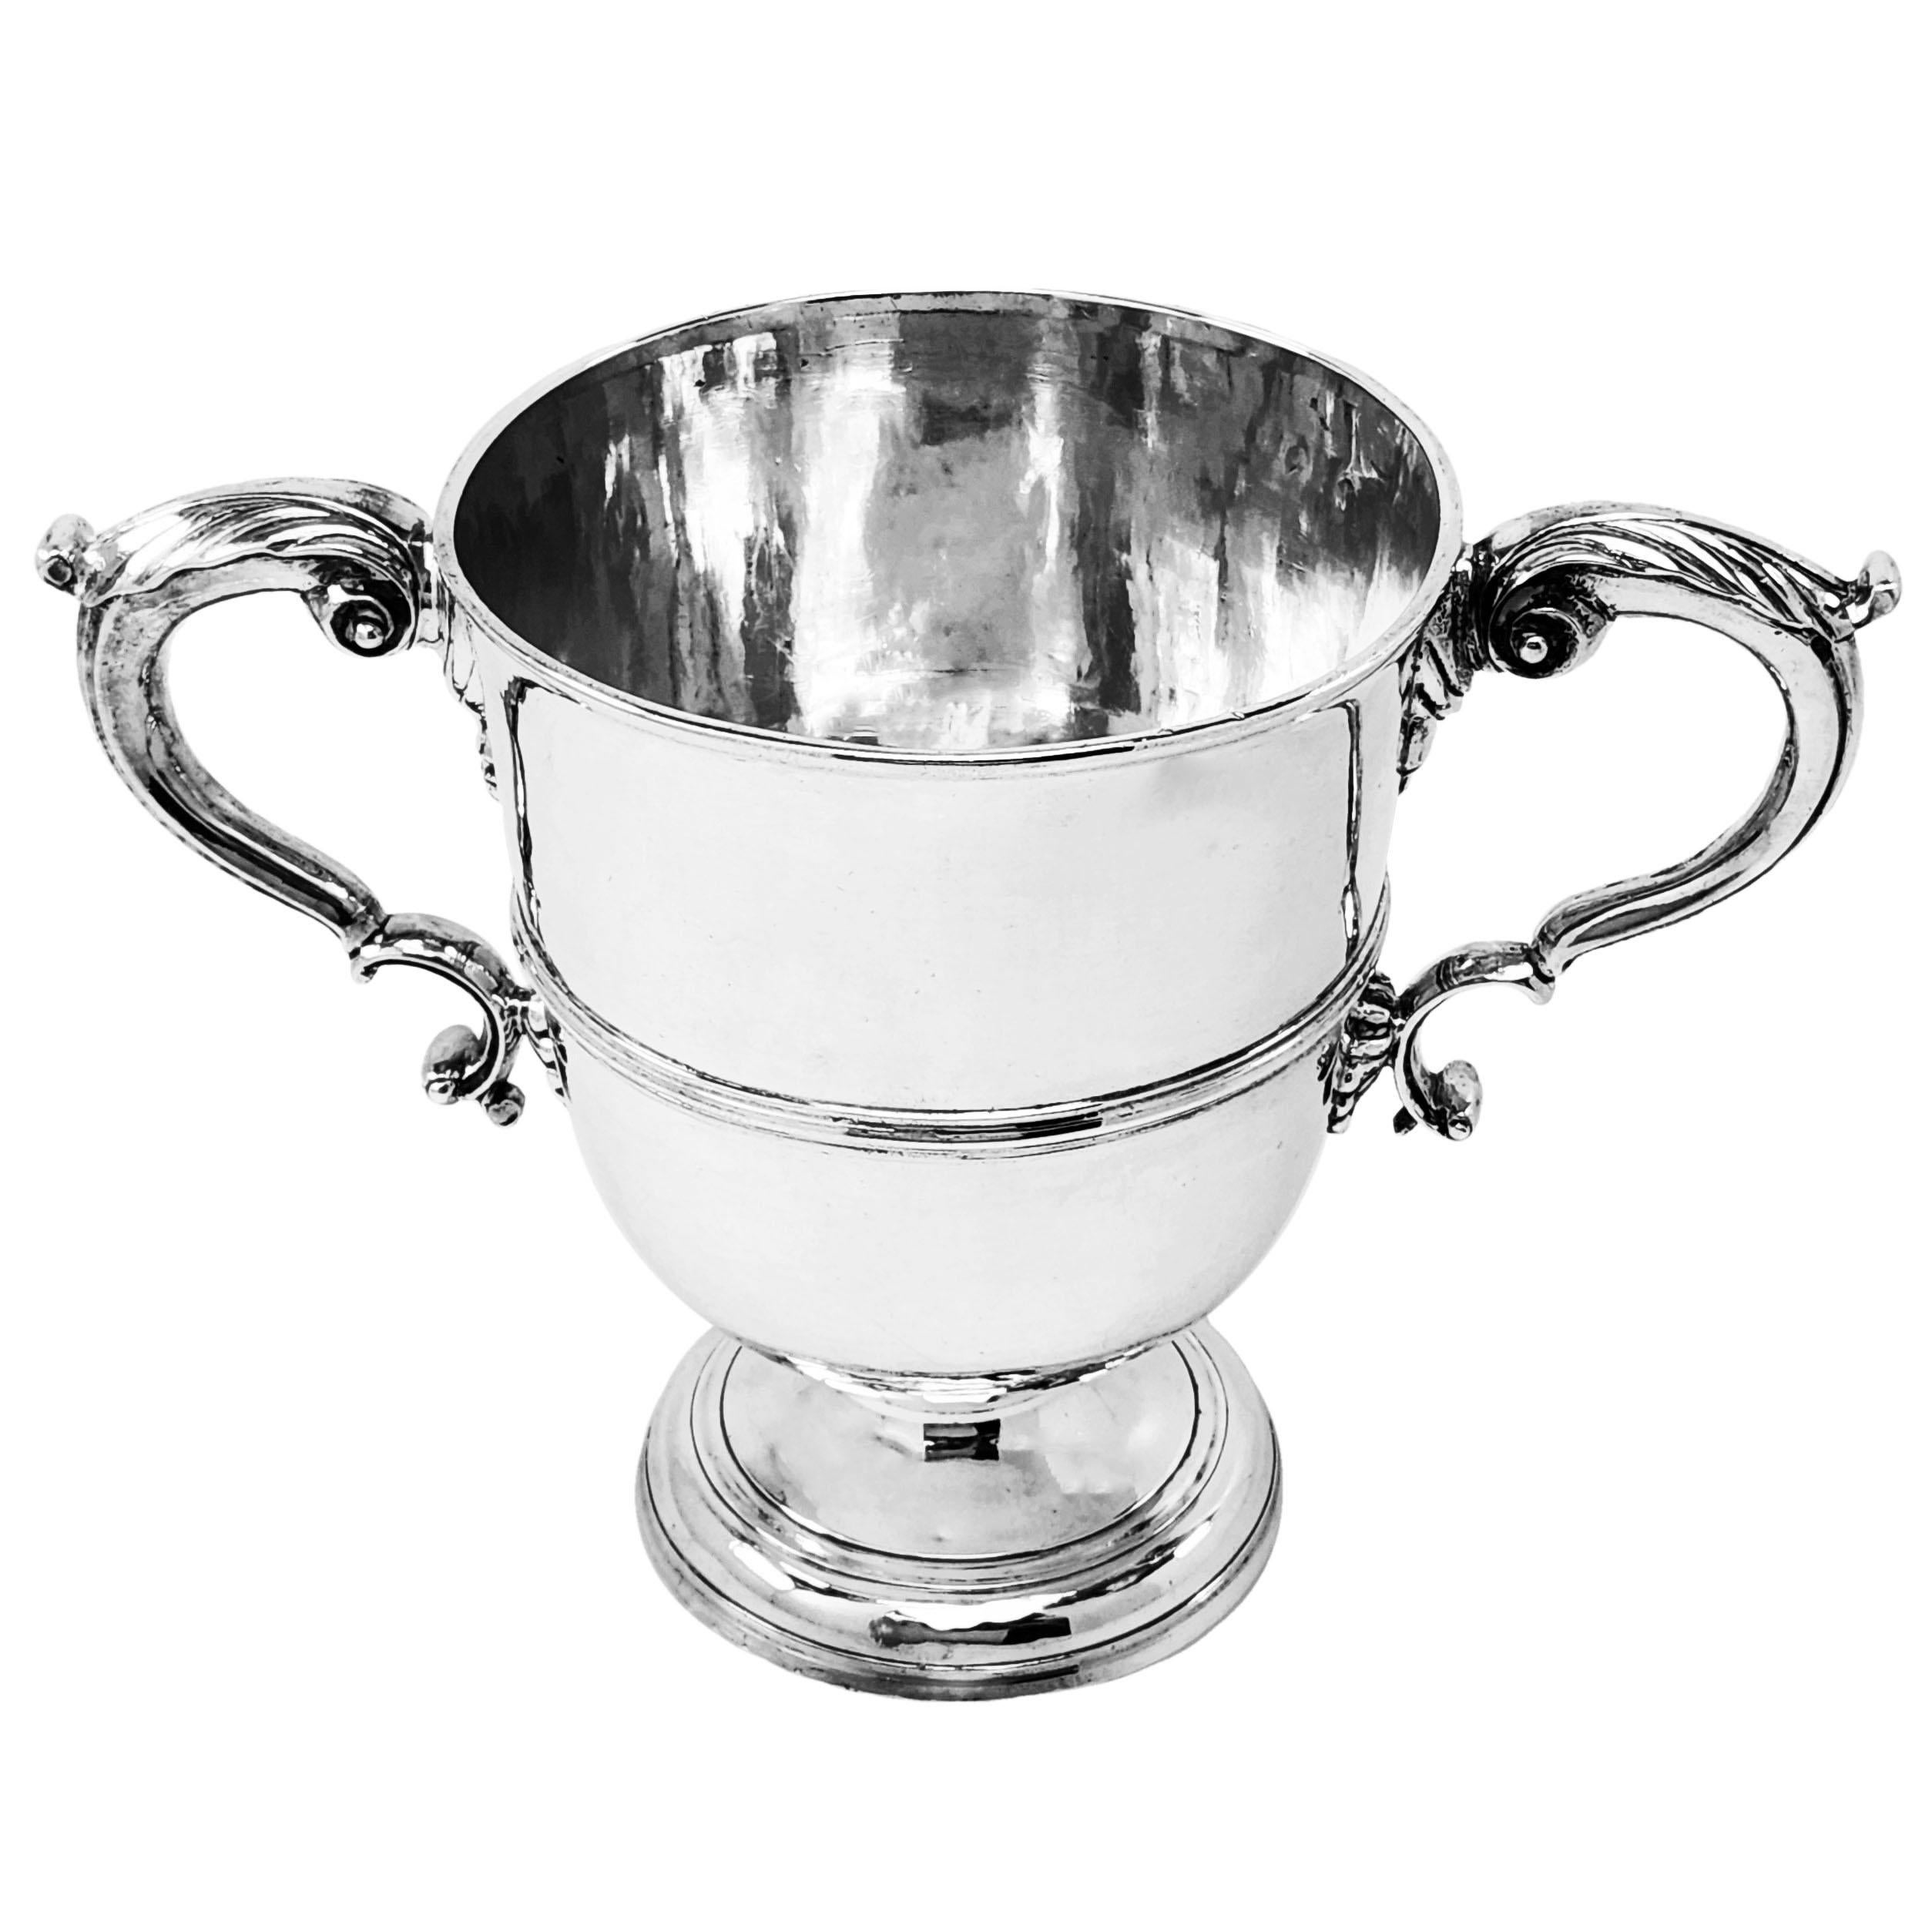 A classic Antique Irish George II Cup with a pair of impressive acanthus leaf topped scroll handles. The Georgian Cup has a band around the body and an engraved crest on the one side. The Cup stands on a spread pedestal foot. This 18th Century Irish